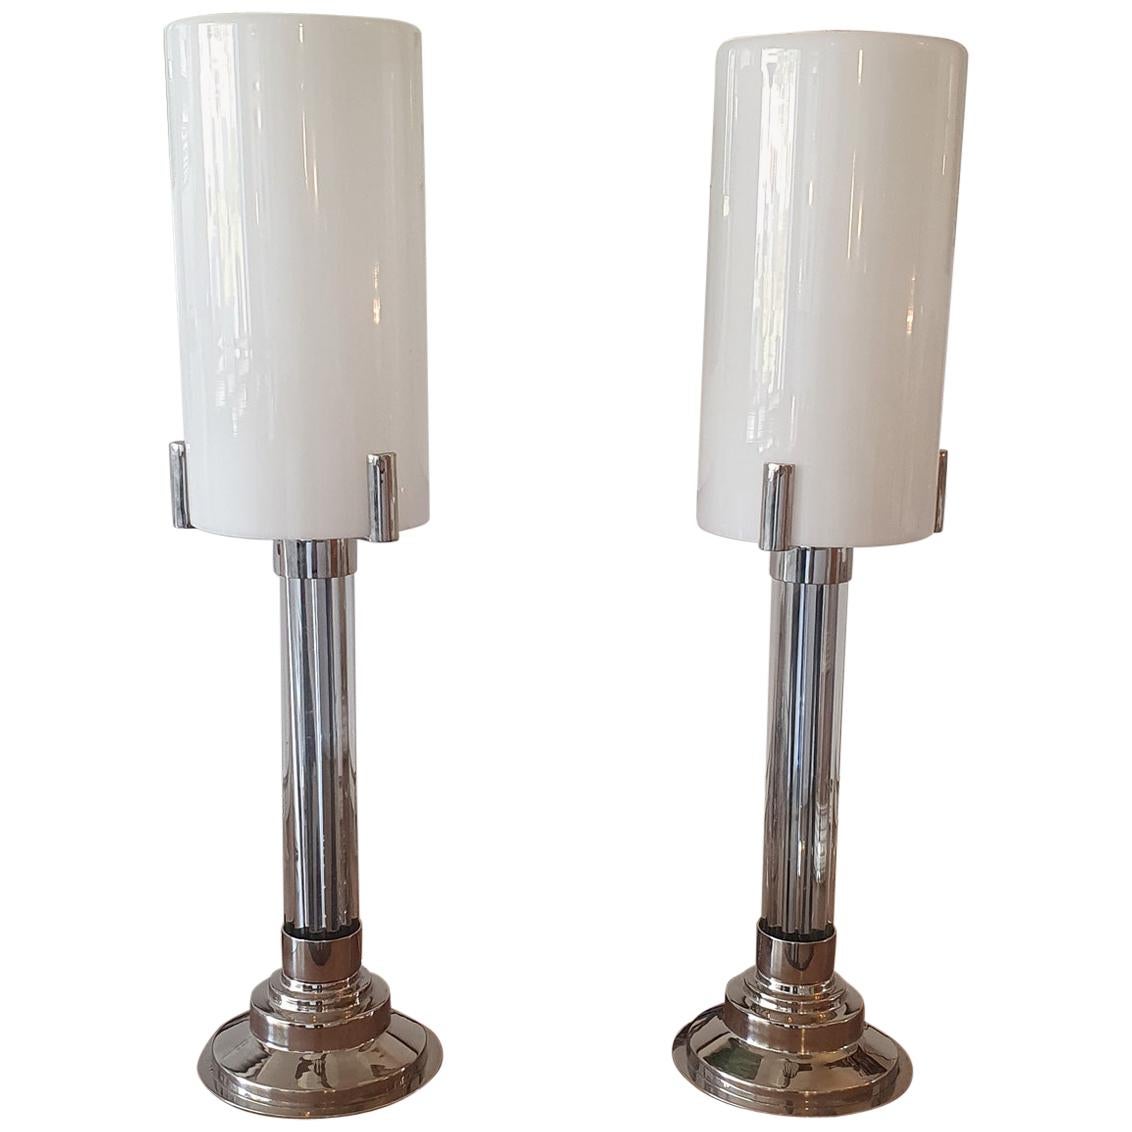 Pair of Art Deco lamp with nickel finish and vintage glass.